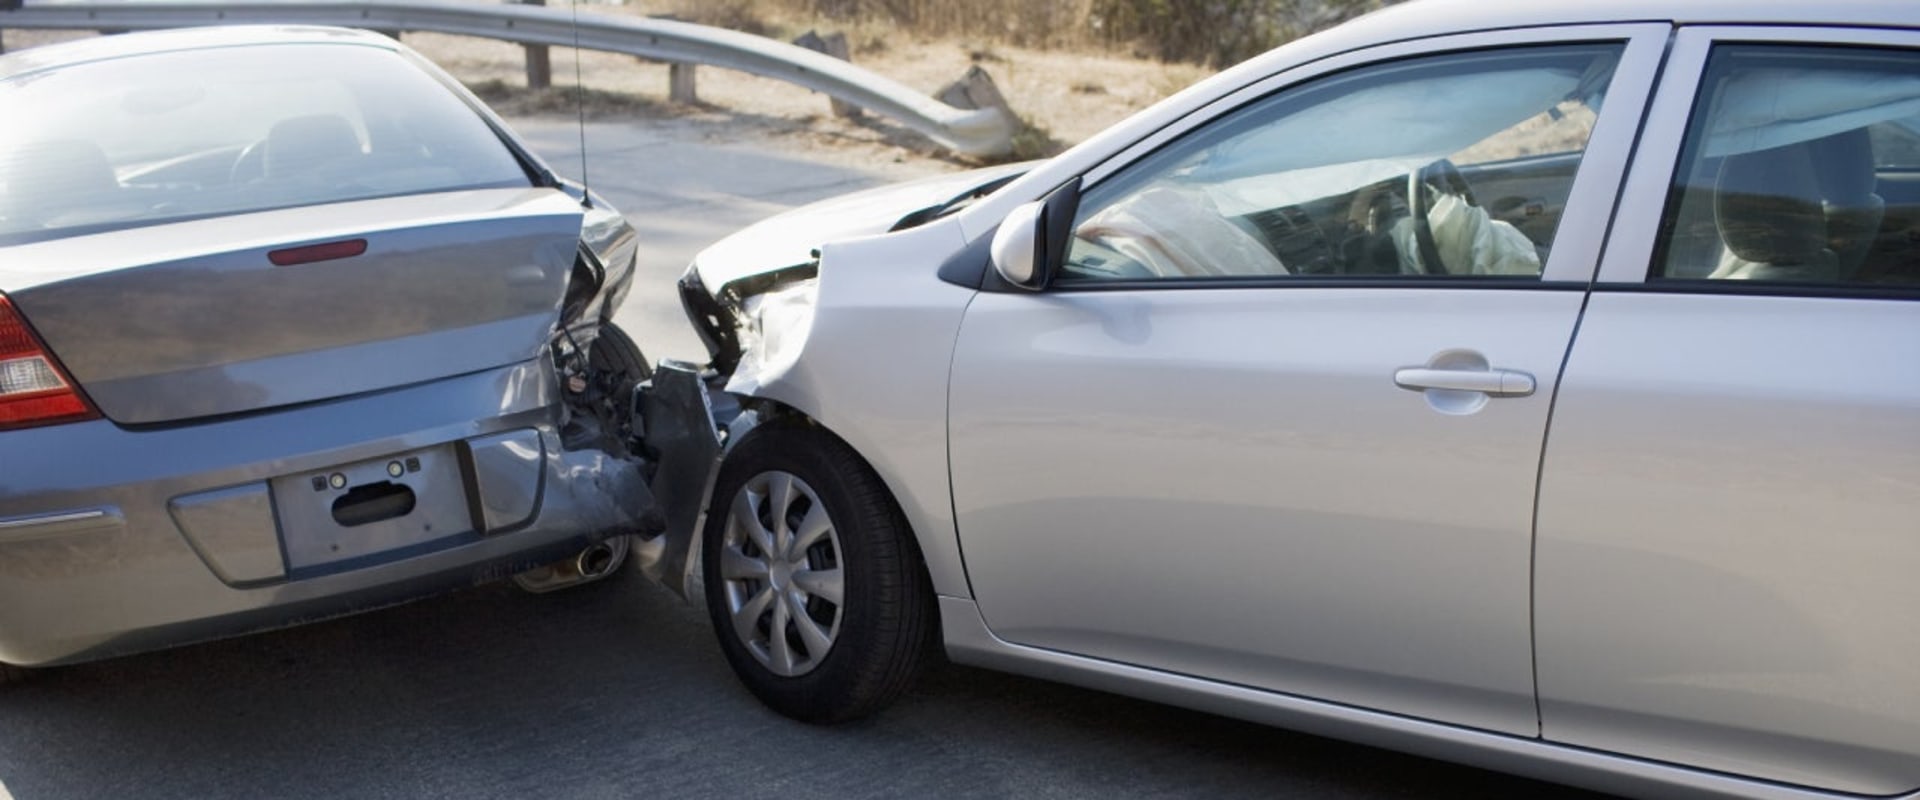 Understanding Types of Car Accidents and Legal Options